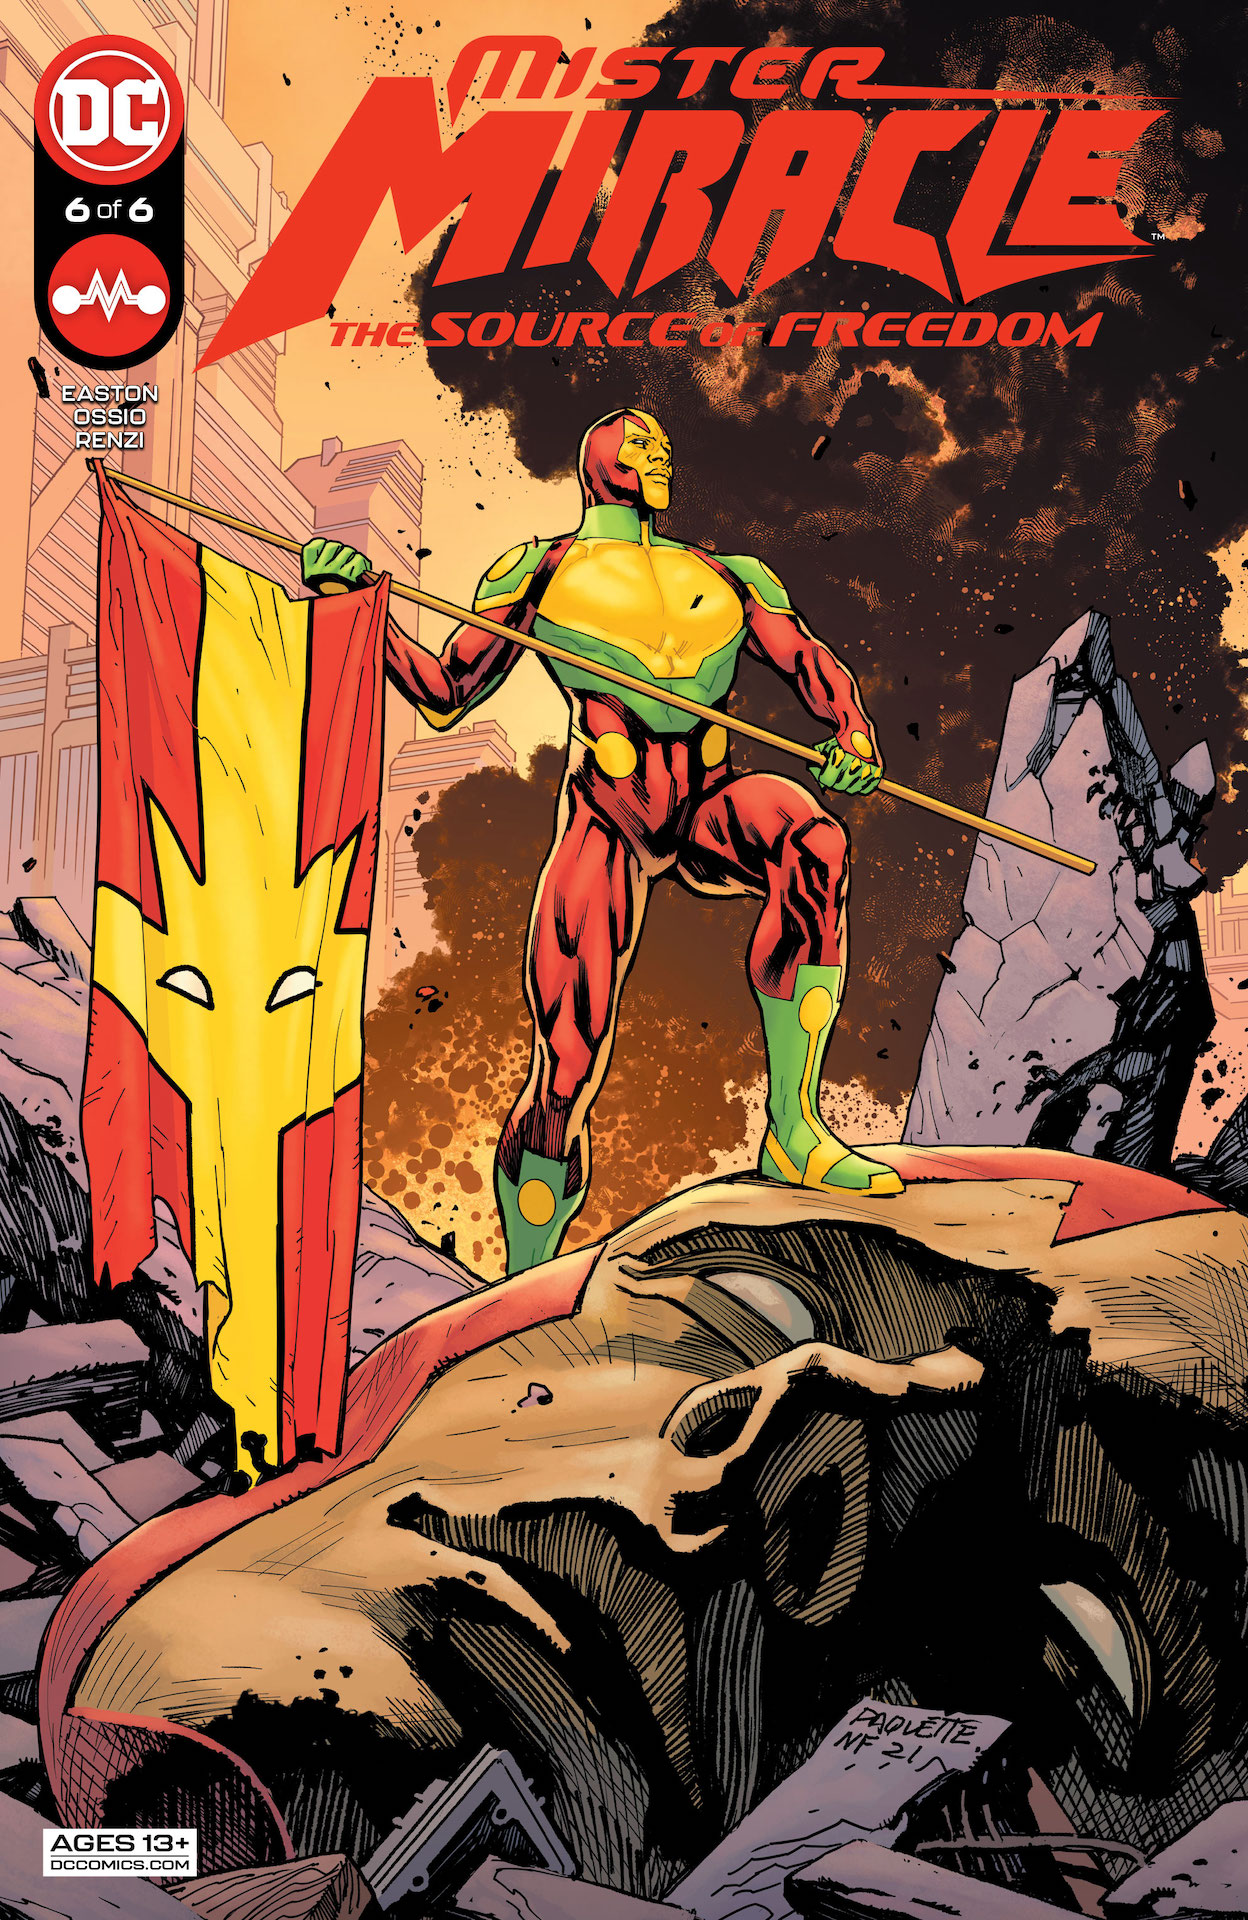 DC Preview: Mister Miracle The Source Of Freedom #6